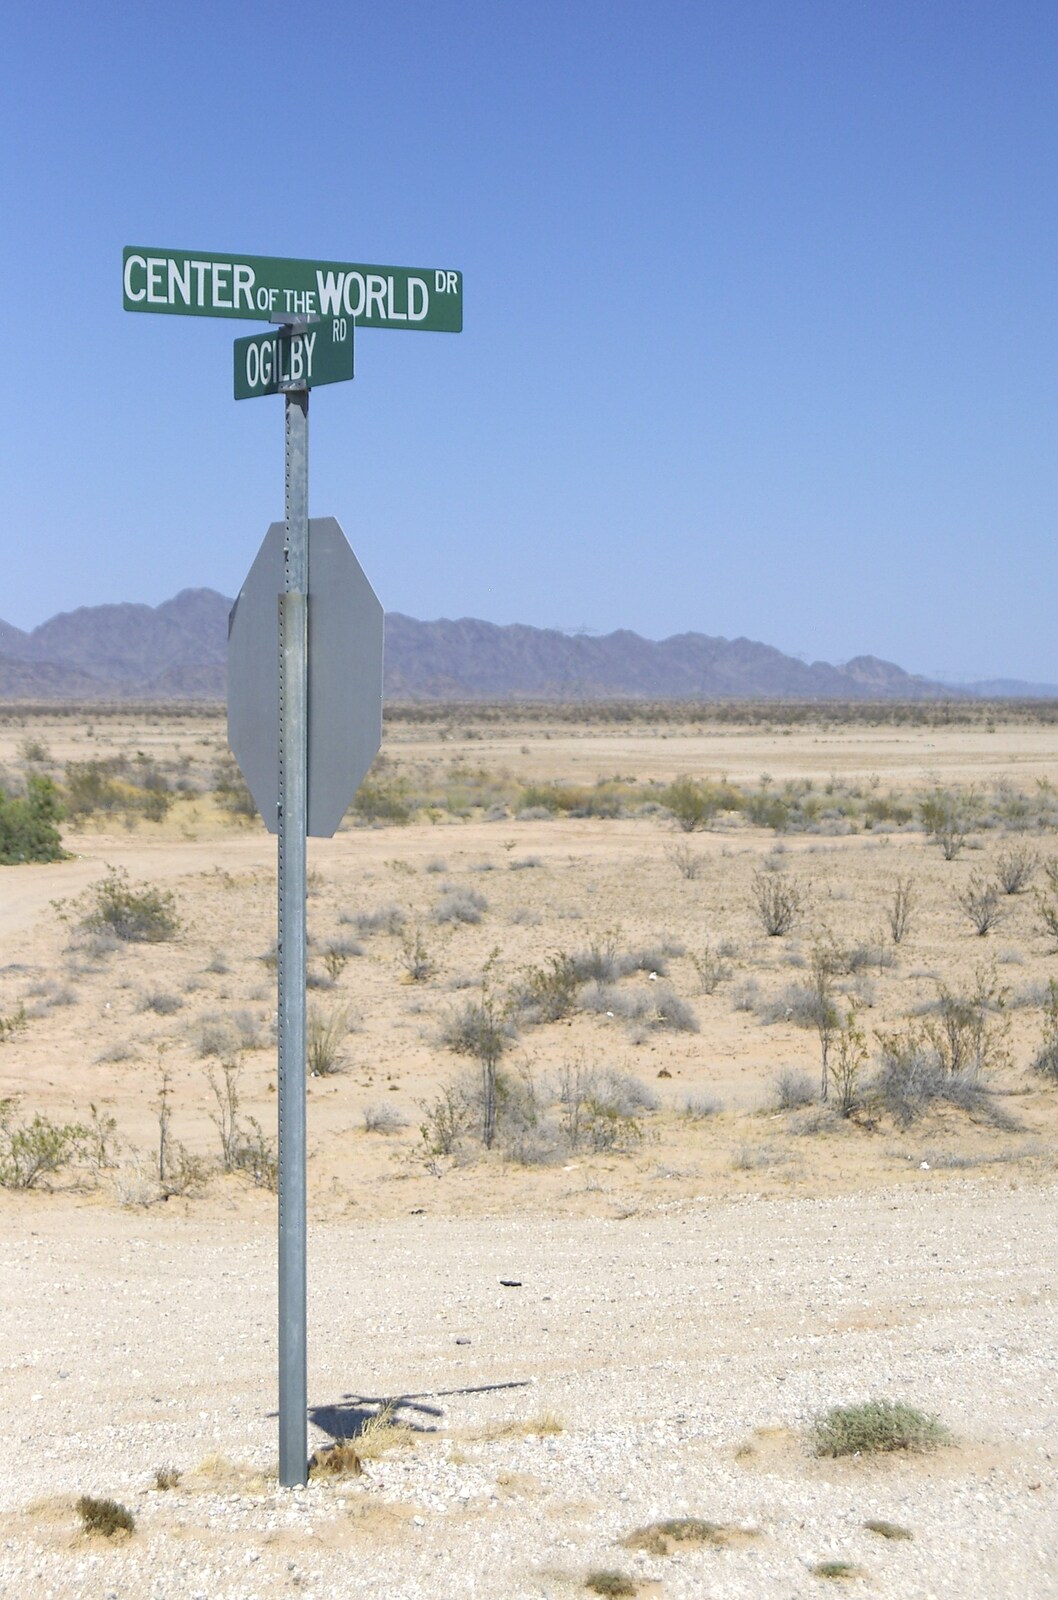 The optimist 'Center of the World Drive' sign from San Diego Seven: The Desert and the Dunes, Arizona and California, US - 22nd April